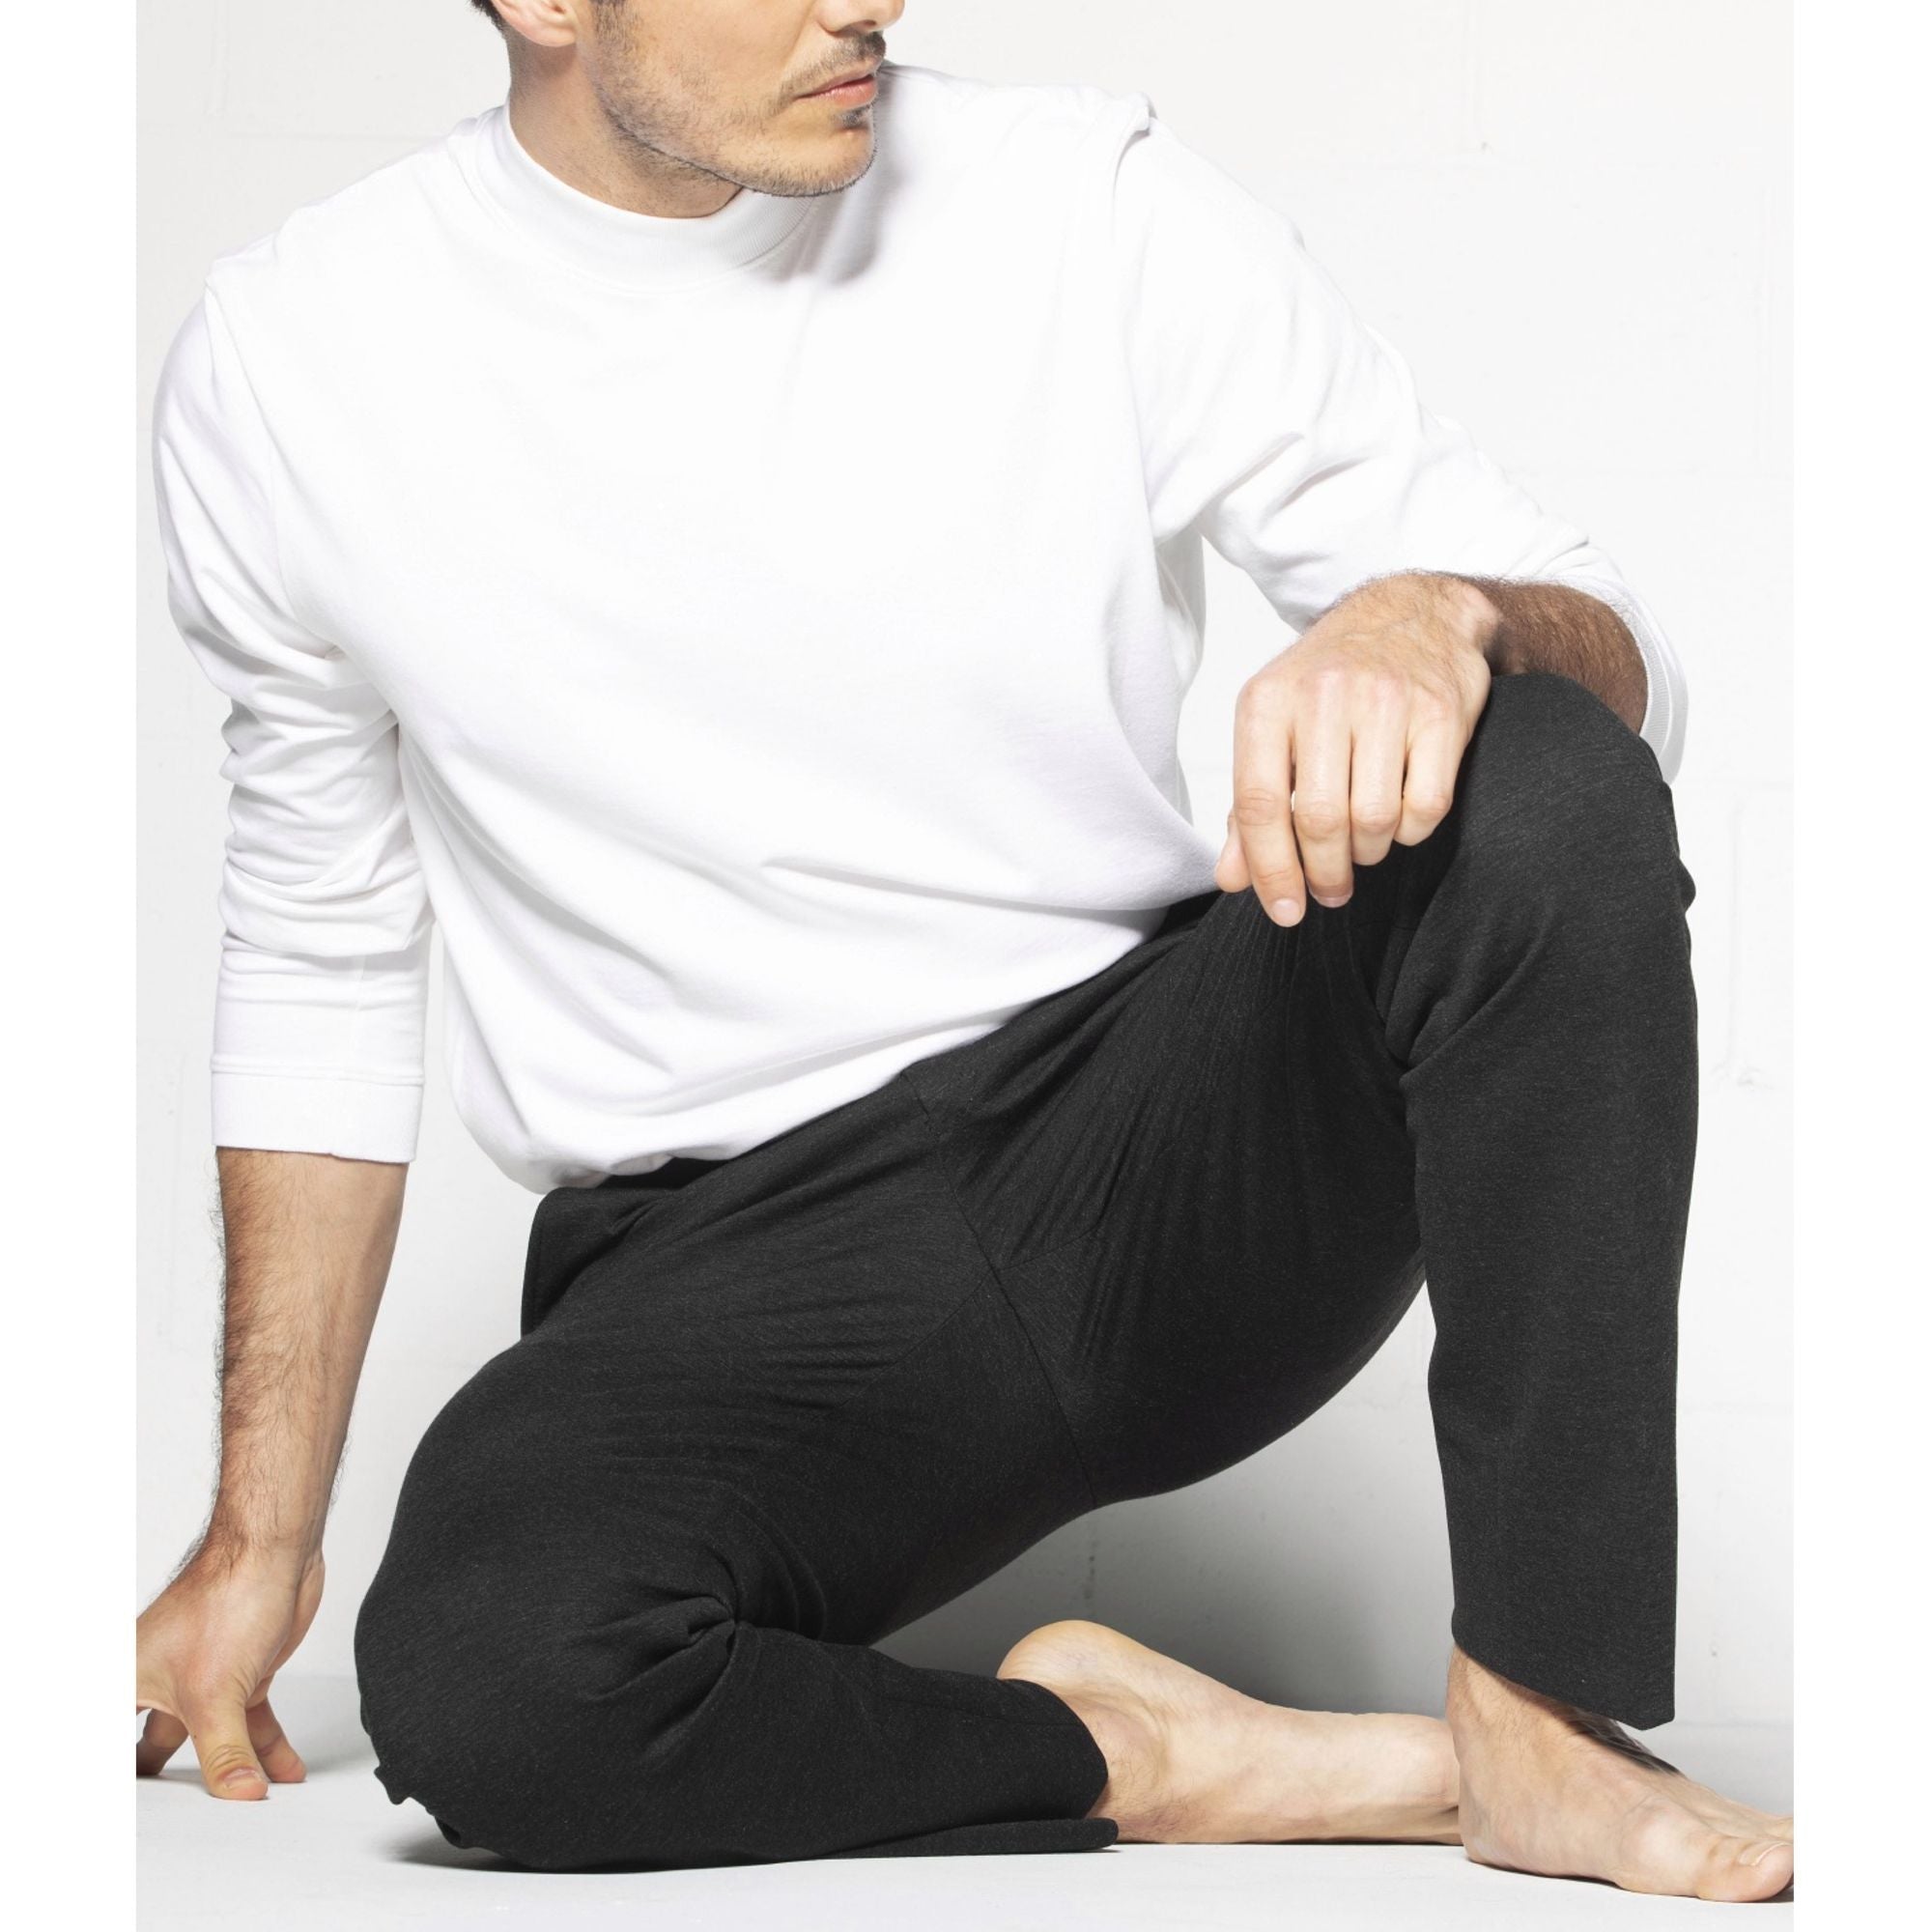 No Limits 360° Stretch High Performance Knit Trouser in Charcoal, Size